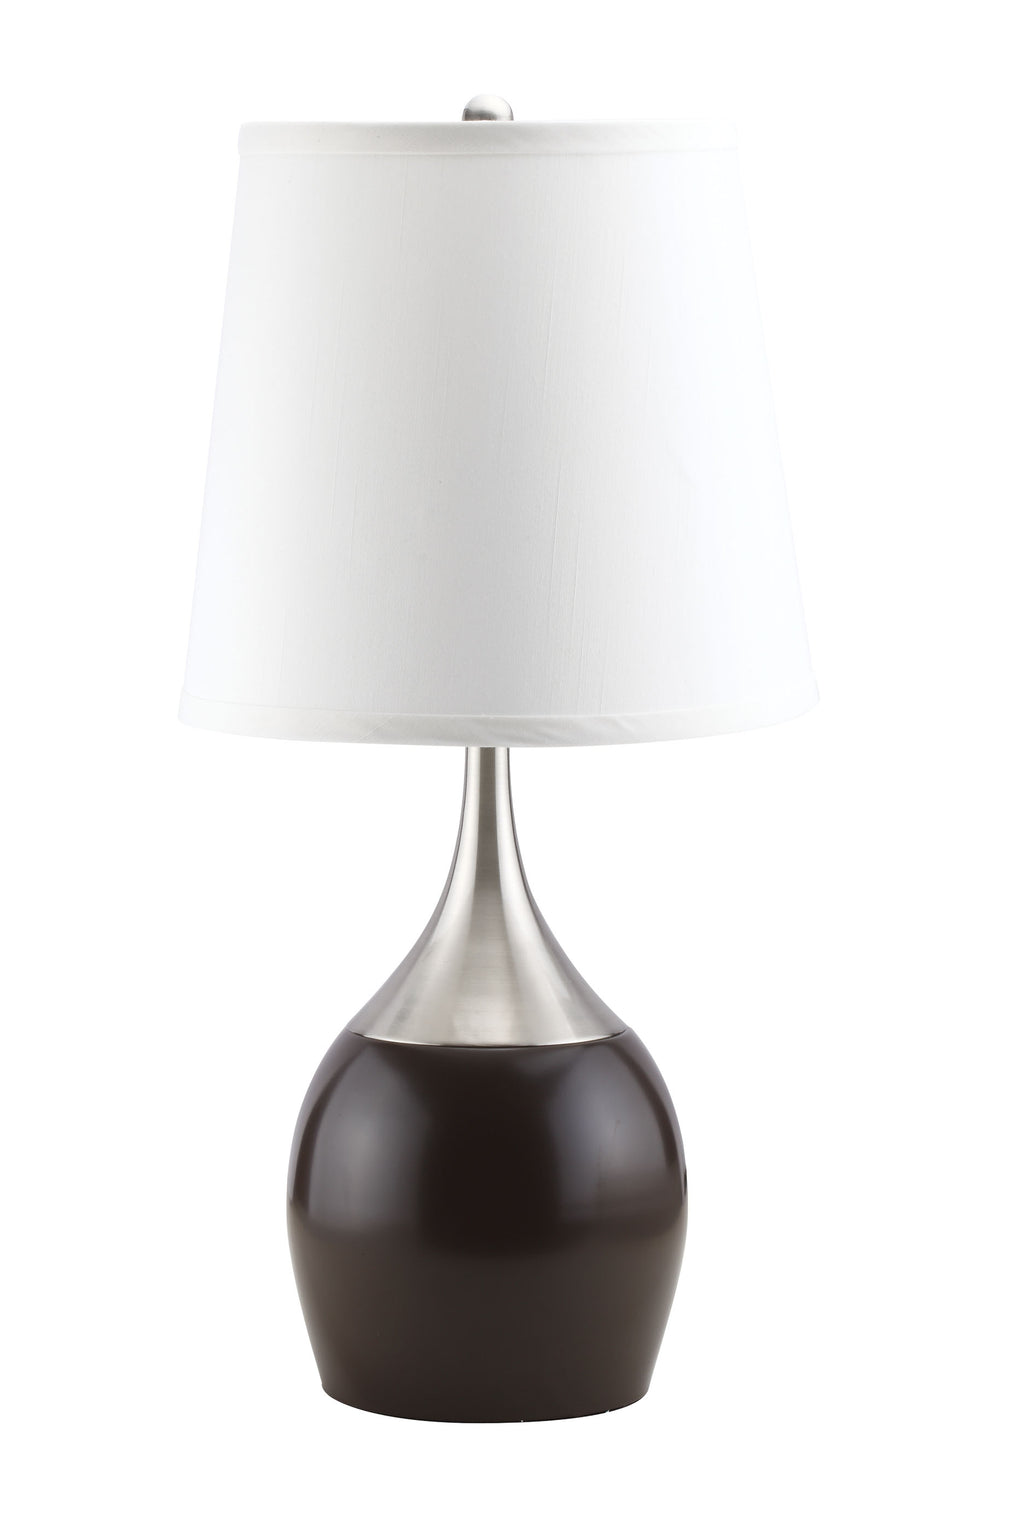 Willow Touch Table Lamp (Set-4), Brushed Silver, Espresso (1Set/2Ctn) - ReeceFurniture.com